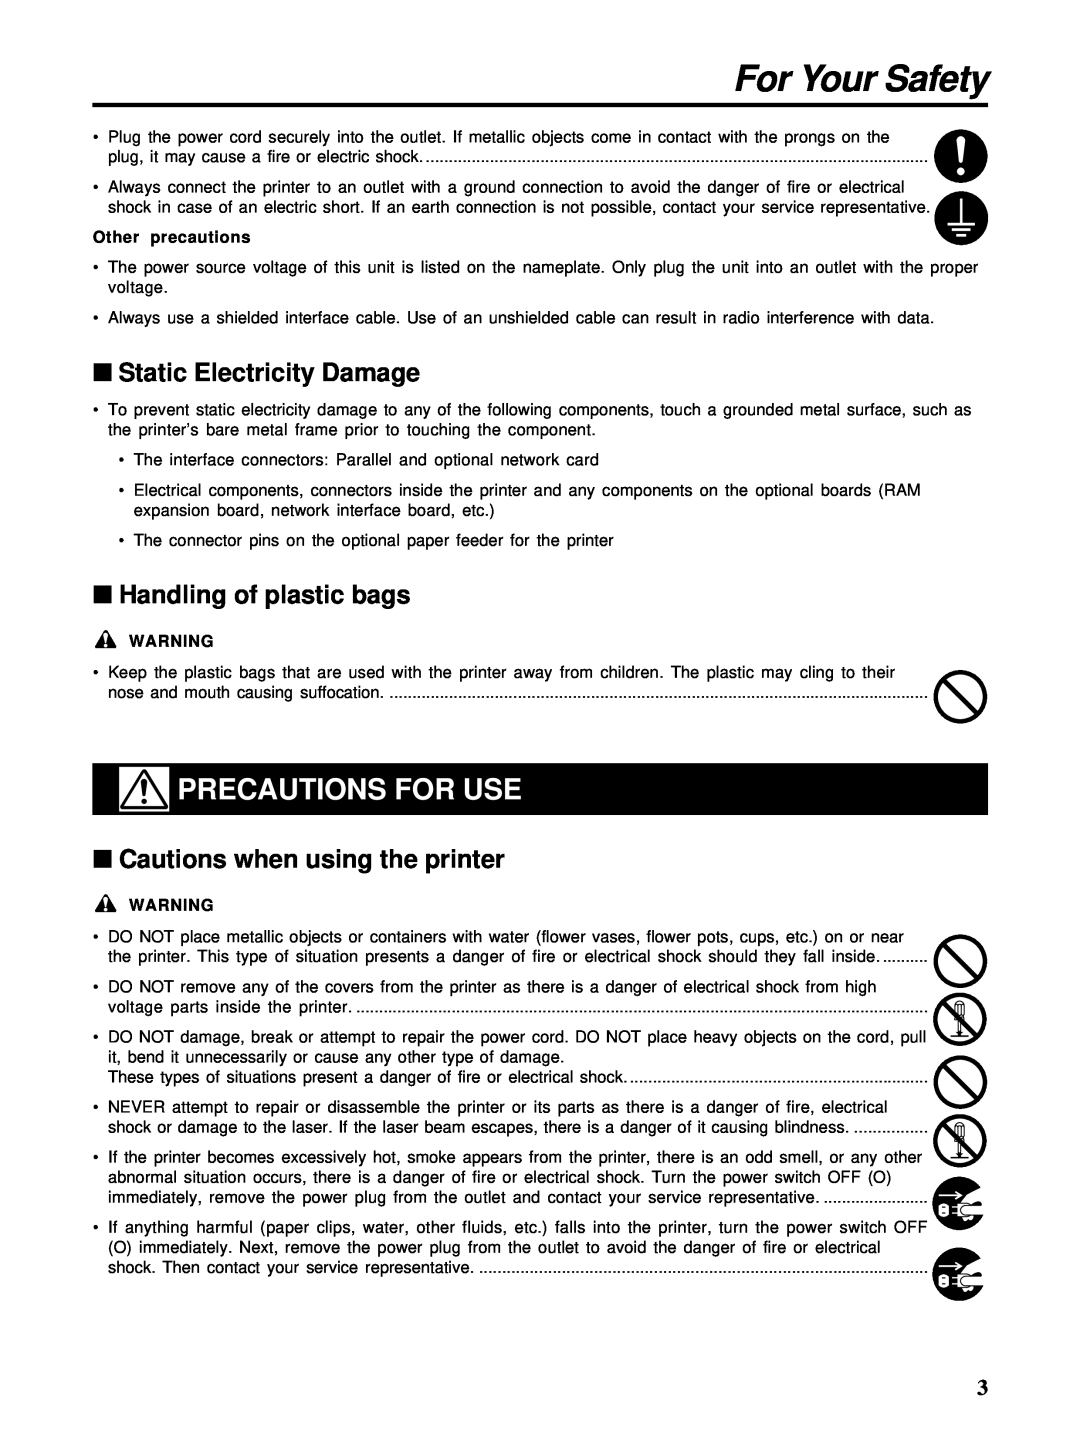 HP Ci 1100 manual Precautions For Use, Static Electricity Damage, Handling of plastic bags, Cautions when using the printer 